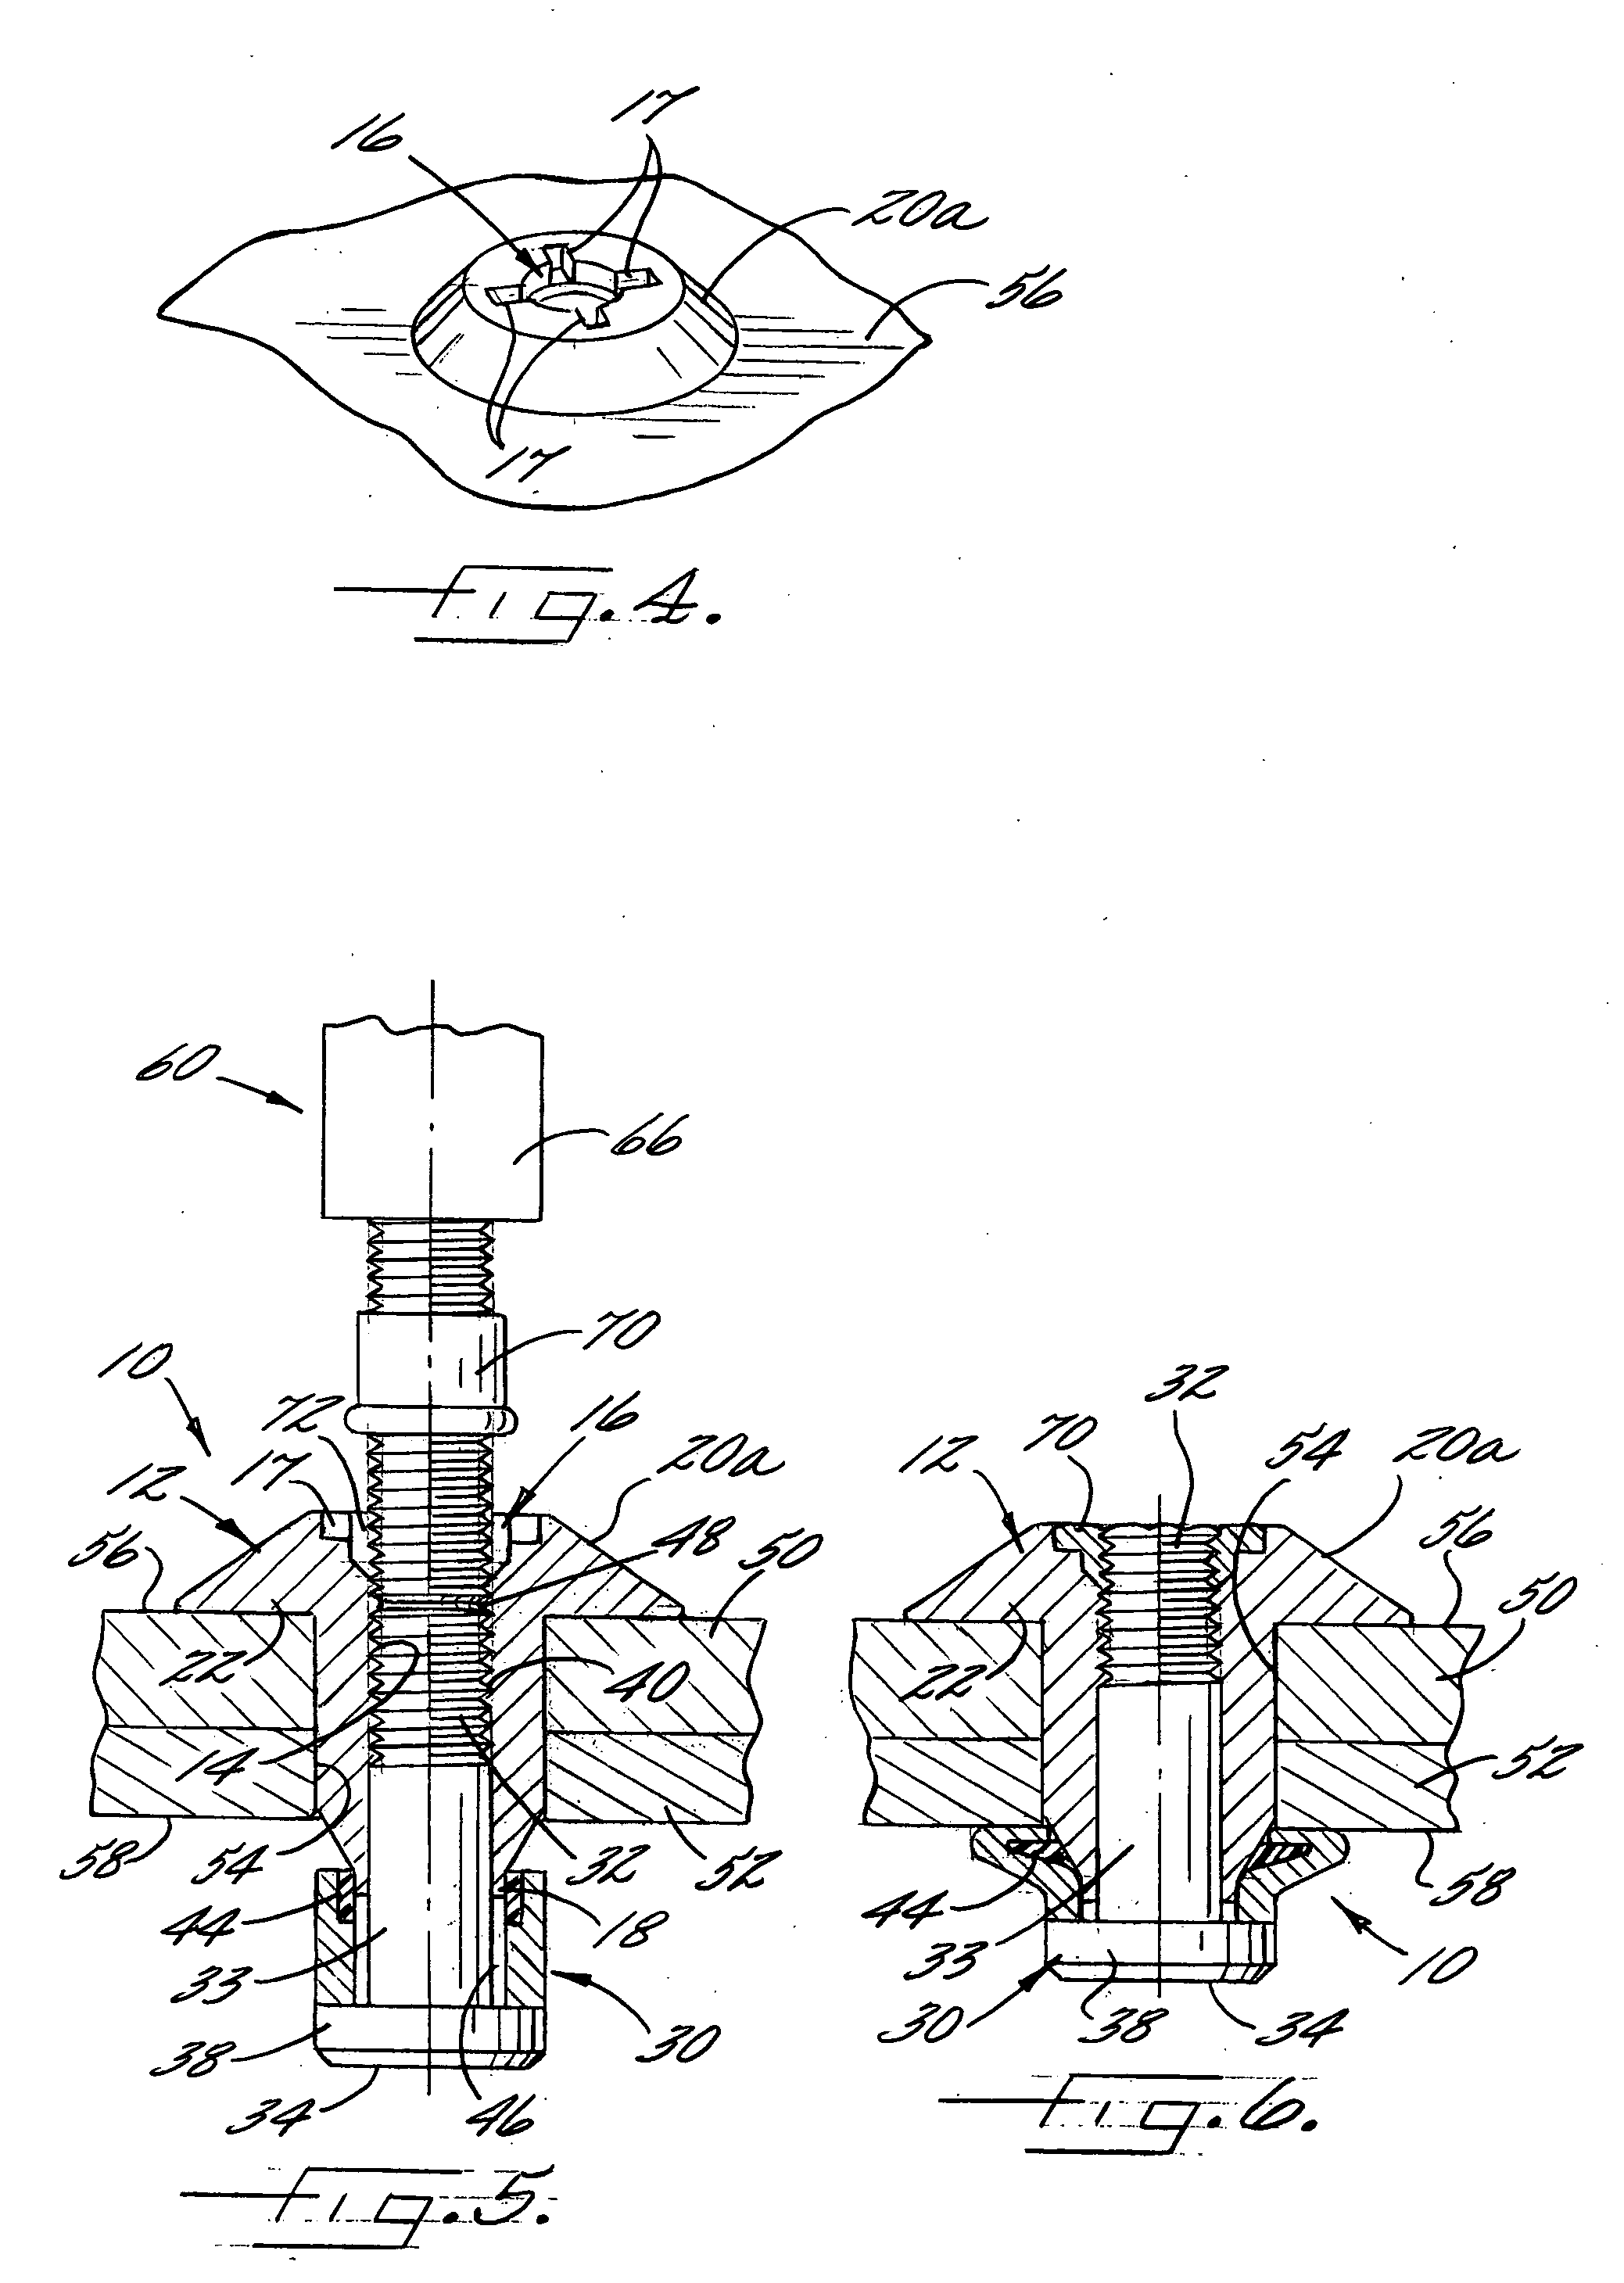 Hybrid fastener apparatus and method for fastening